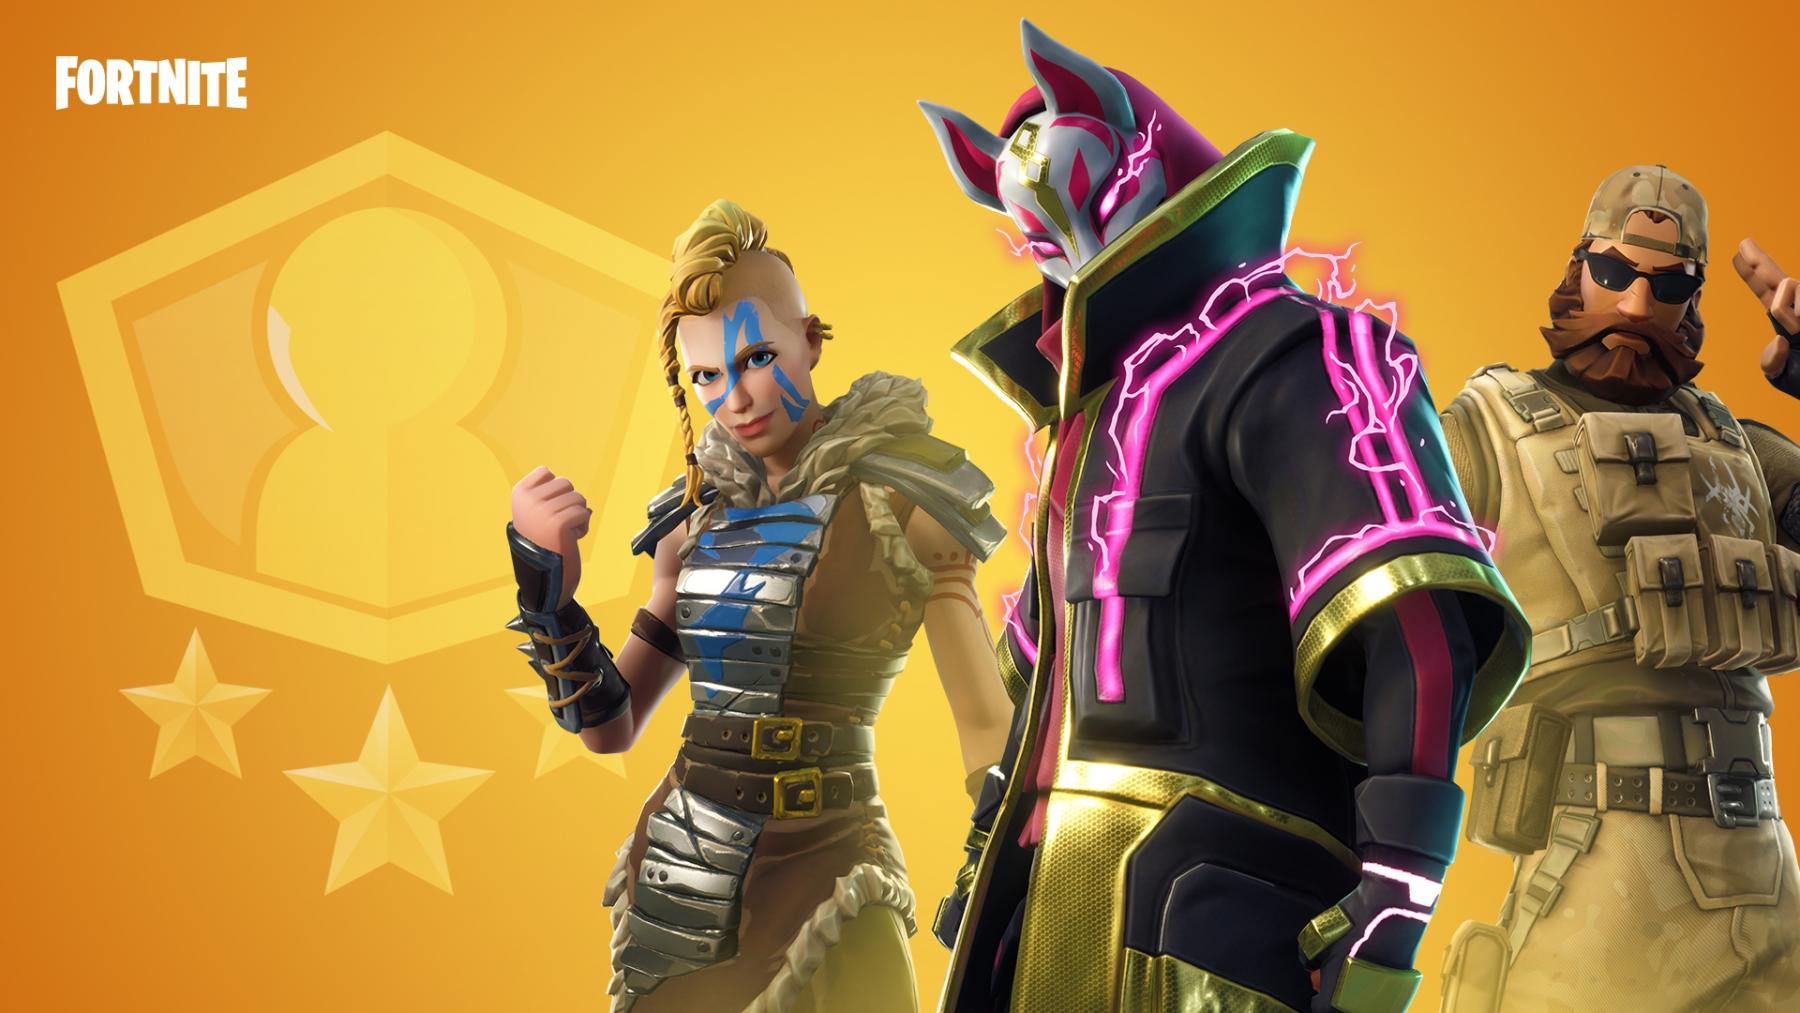 Video Game Fortnite HD Static Wallpaper Collection. YL